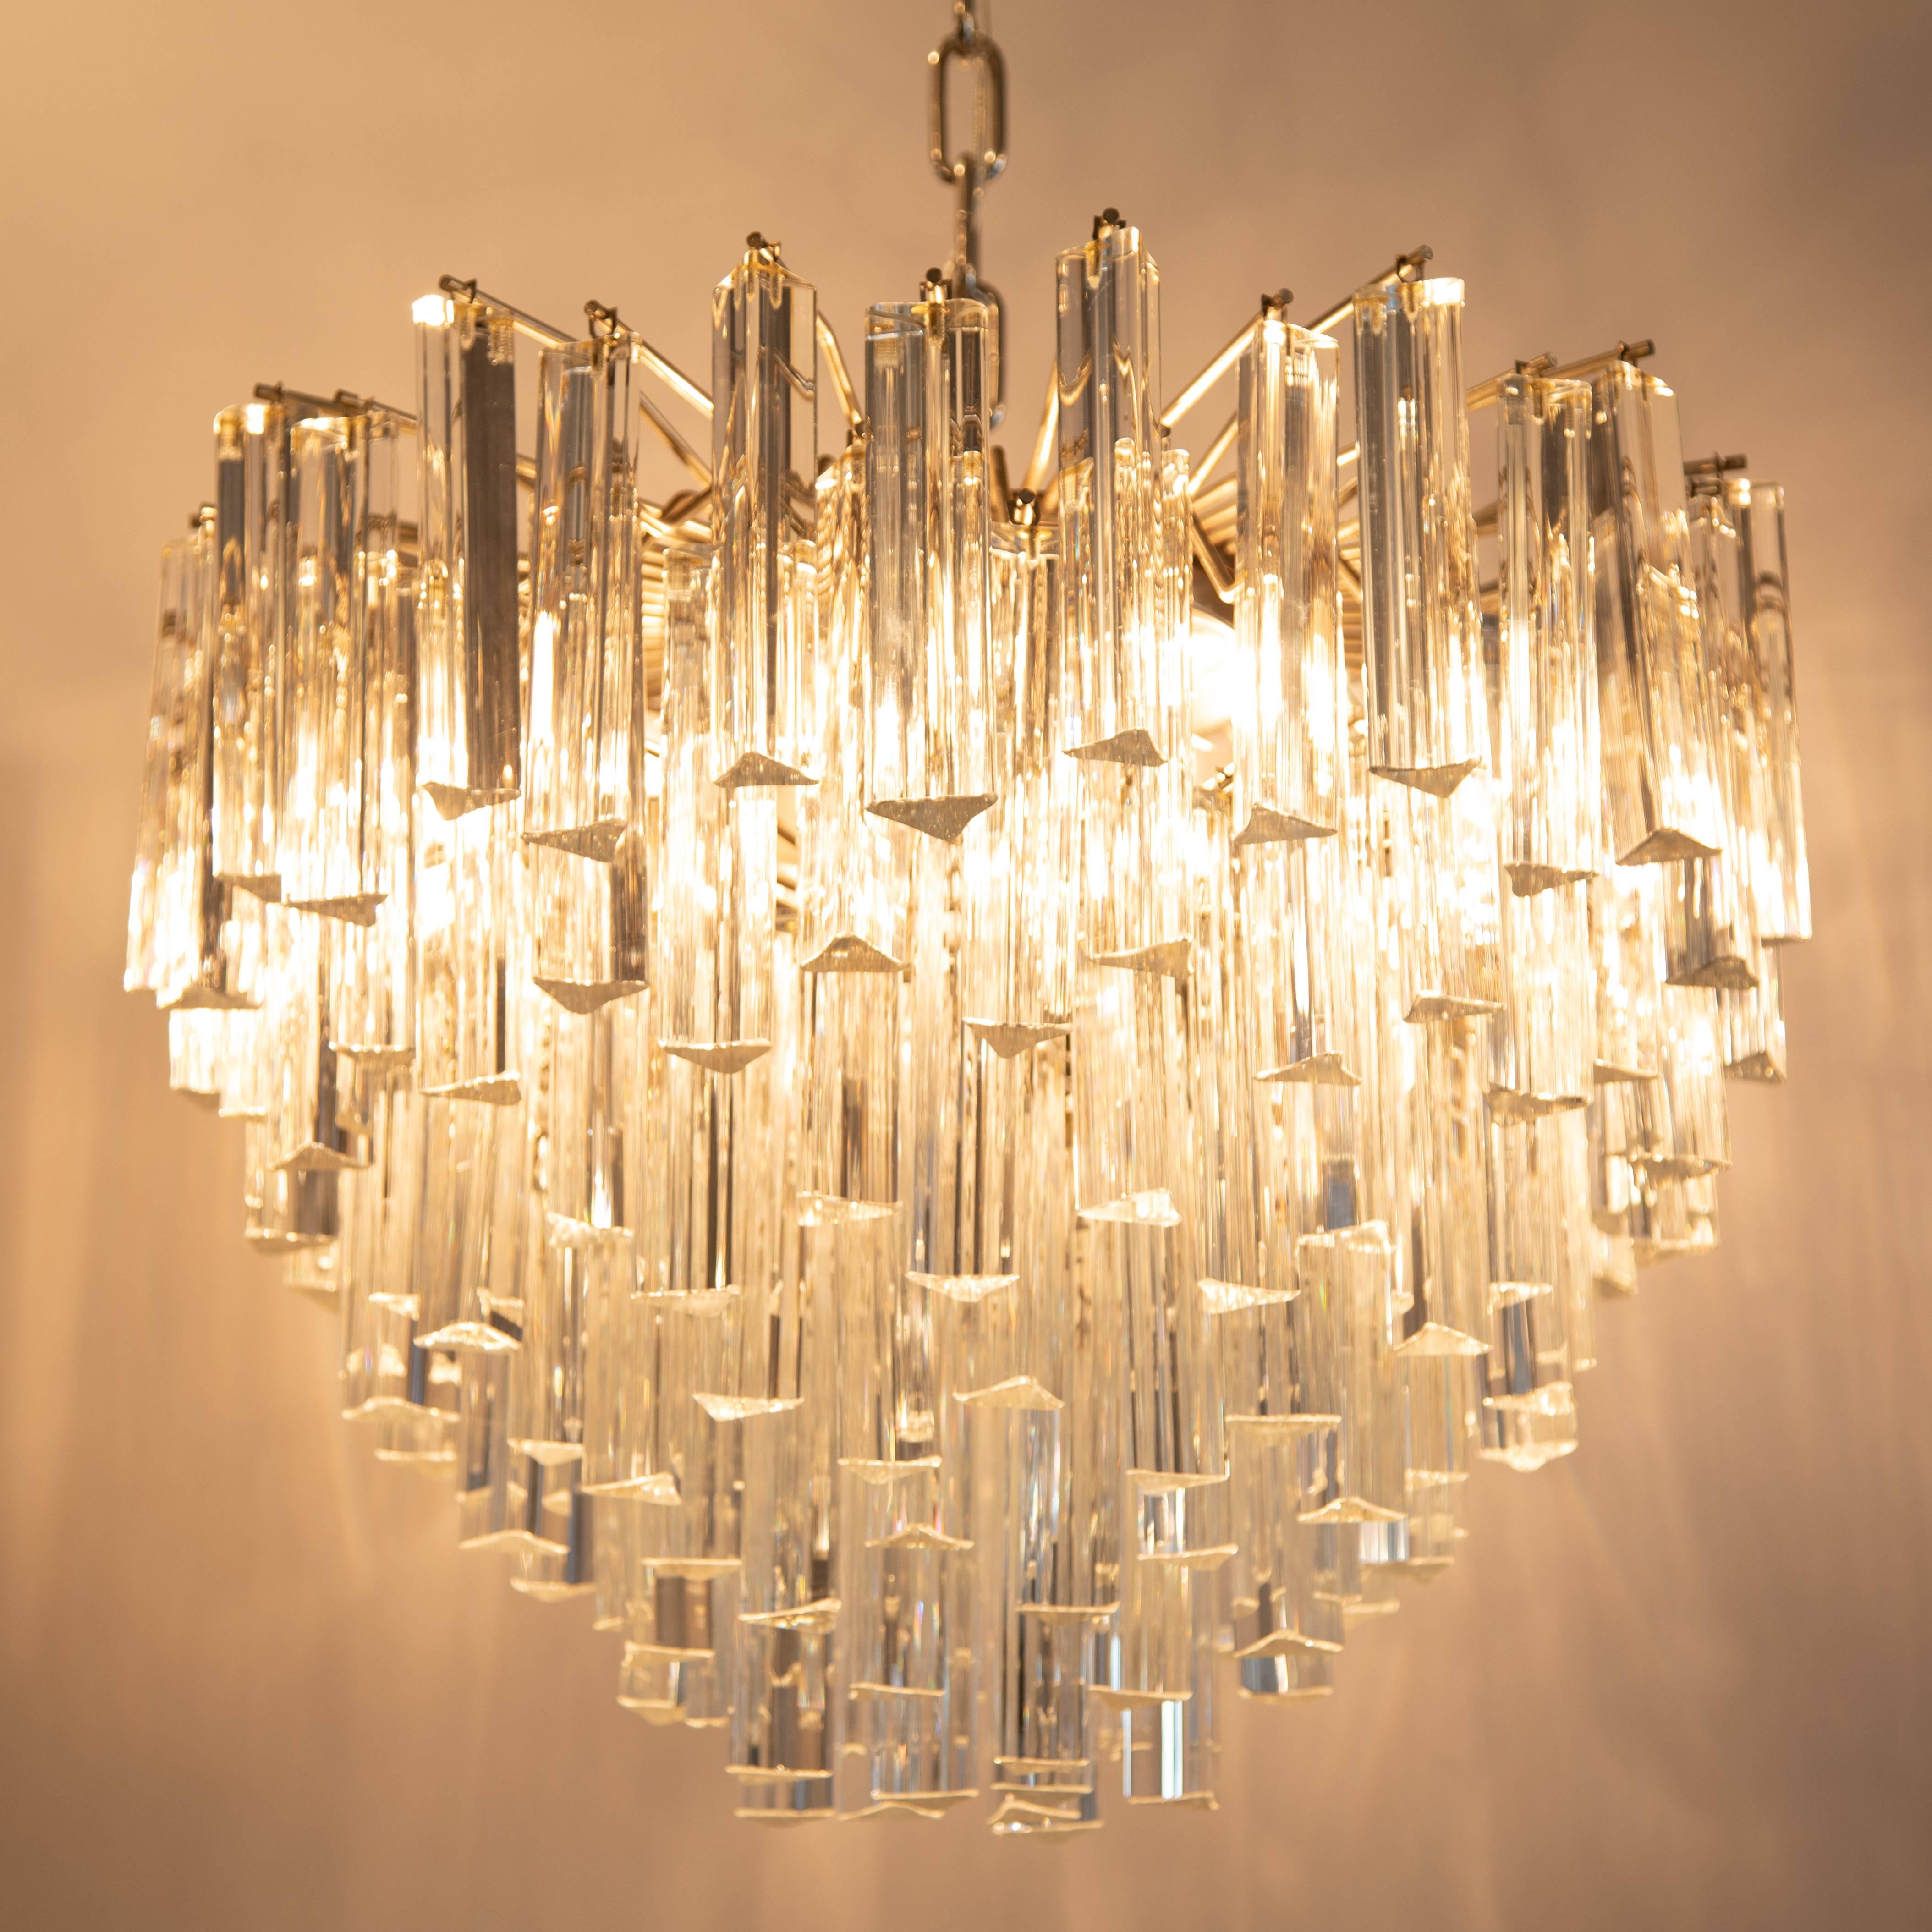 Beautiful tiered 1970s Murano chandelier with 144 6